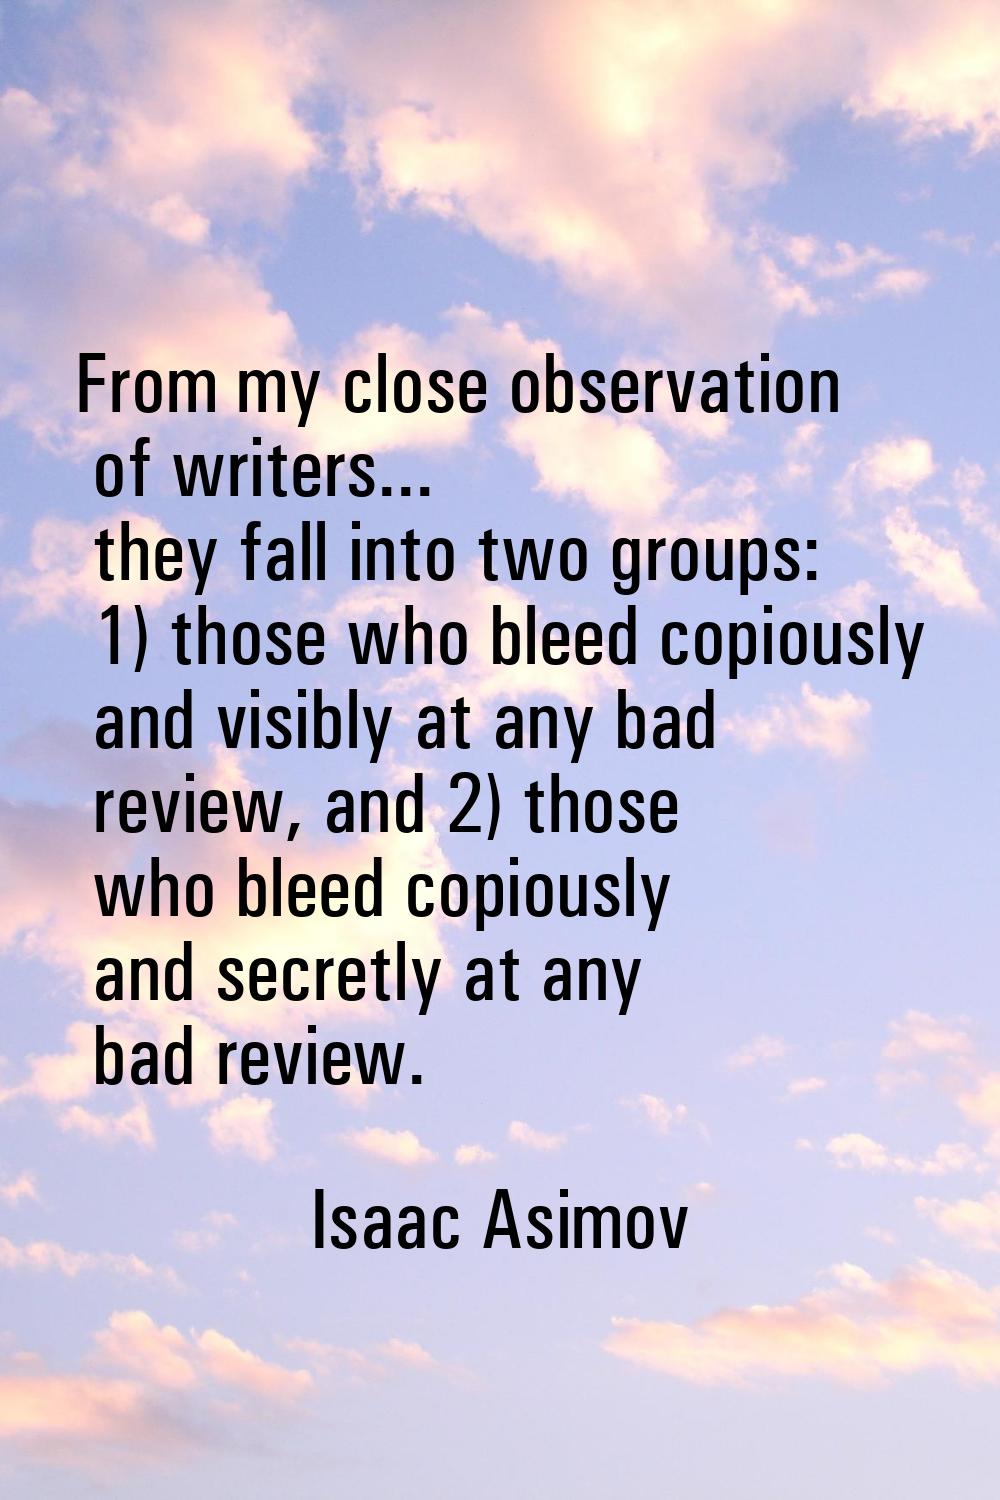 From my close observation of writers... they fall into two groups: 1) those who bleed copiously and